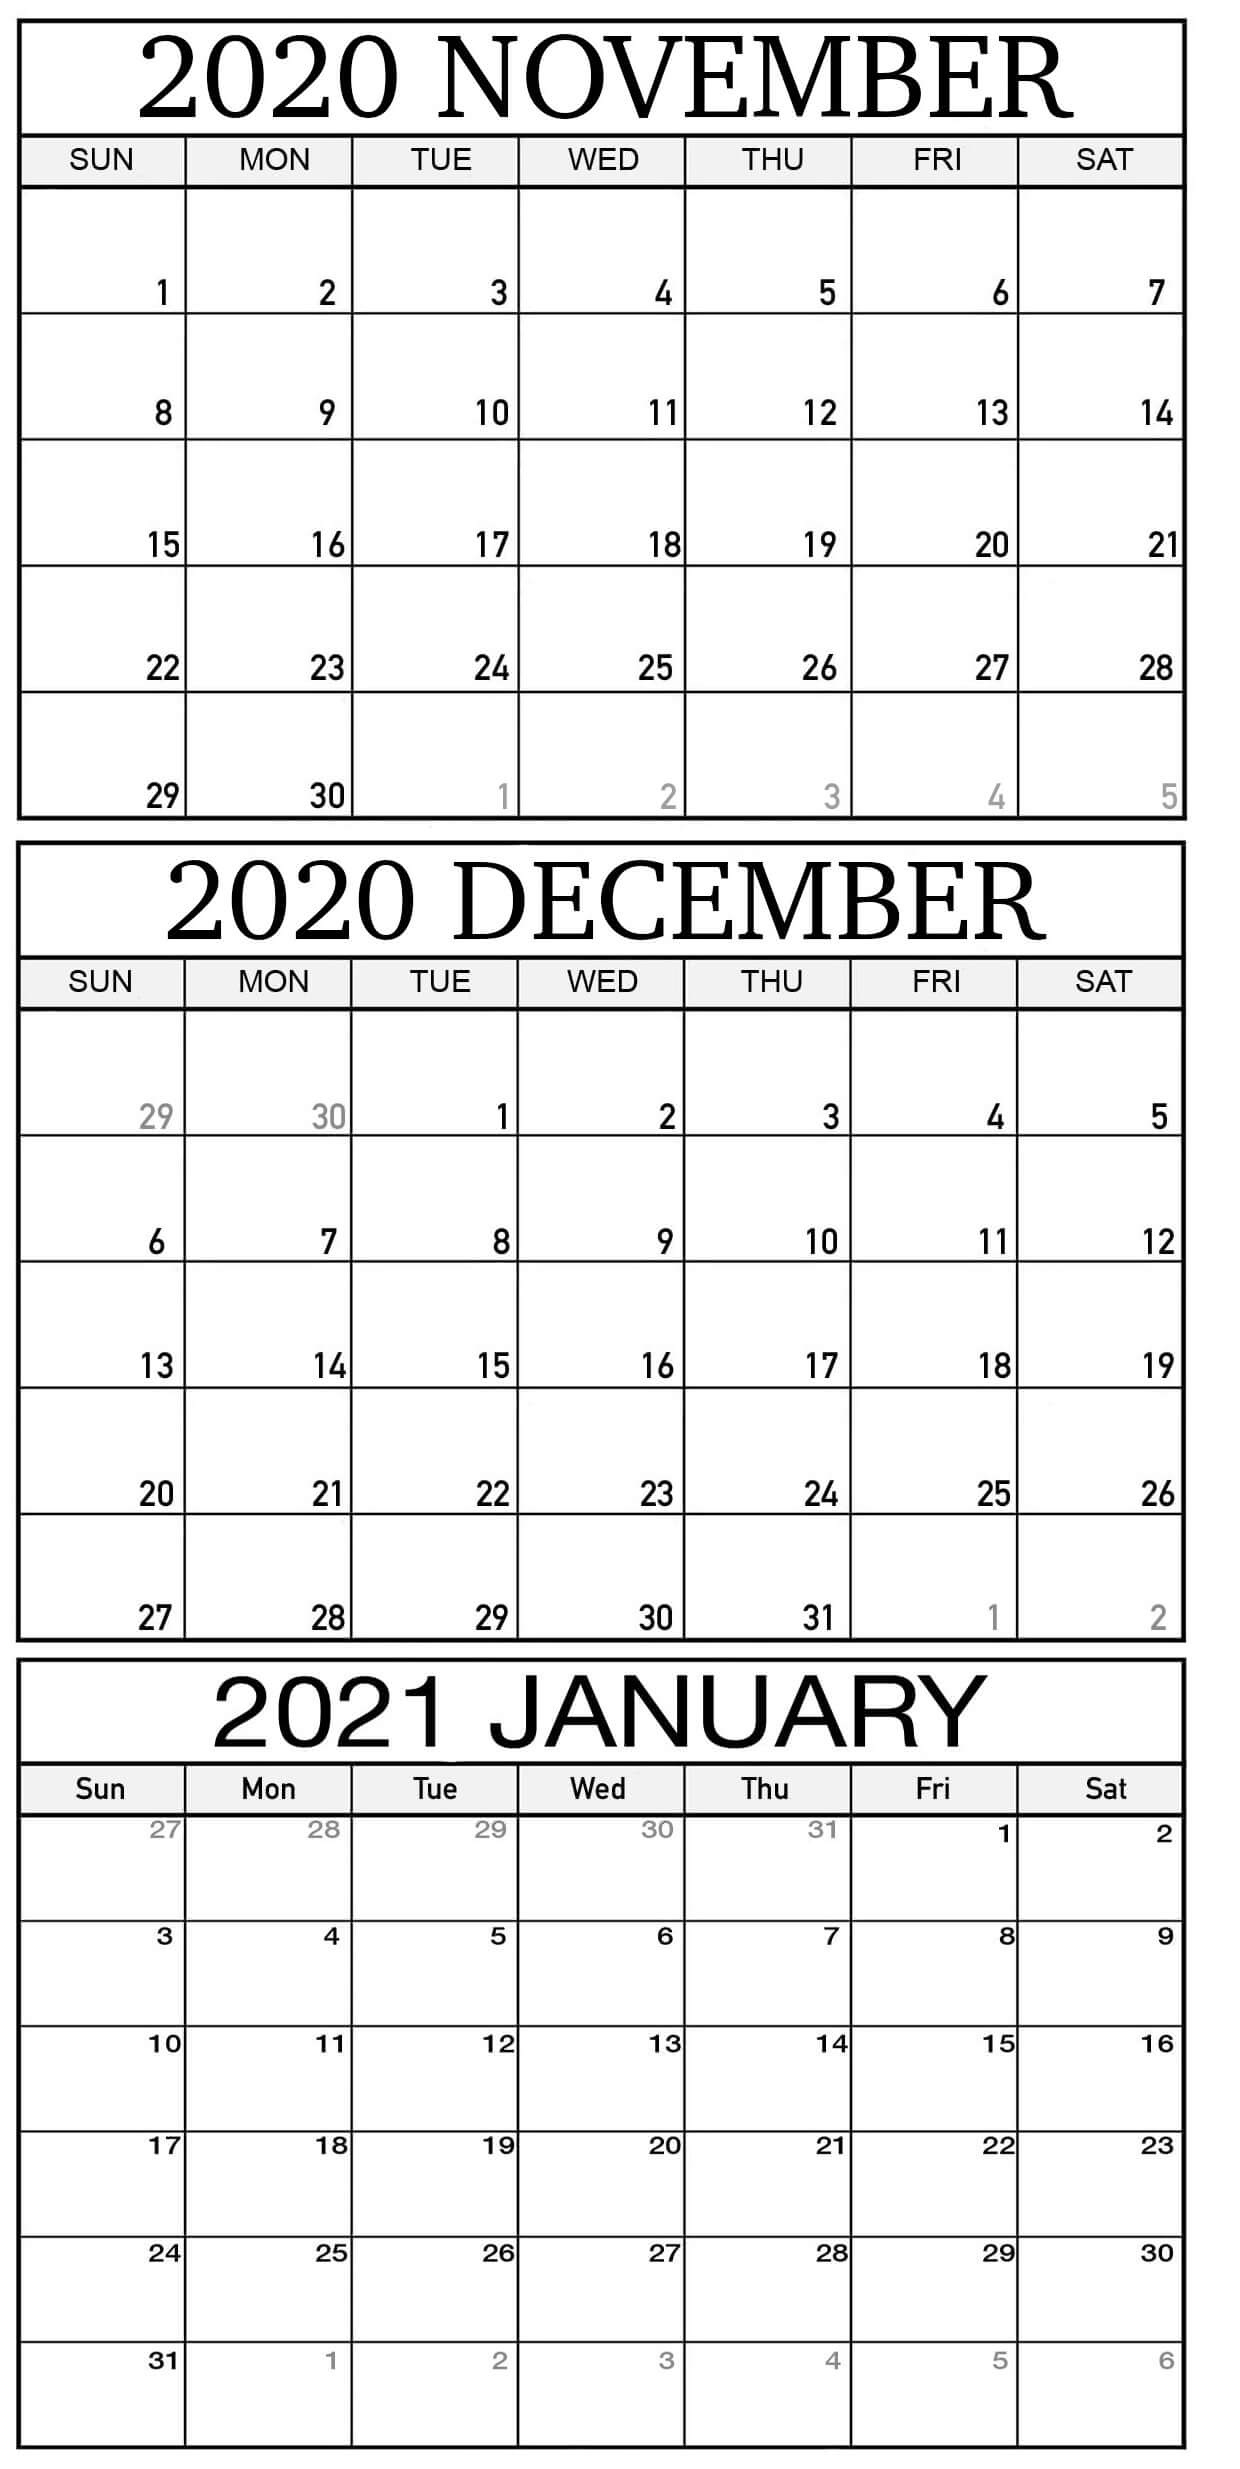 Free November 2020 To January 2021 Calendar For Planning - Set Your Plan &amp; Tasks With Best Ideas November December 2020 January 2021 Calendar